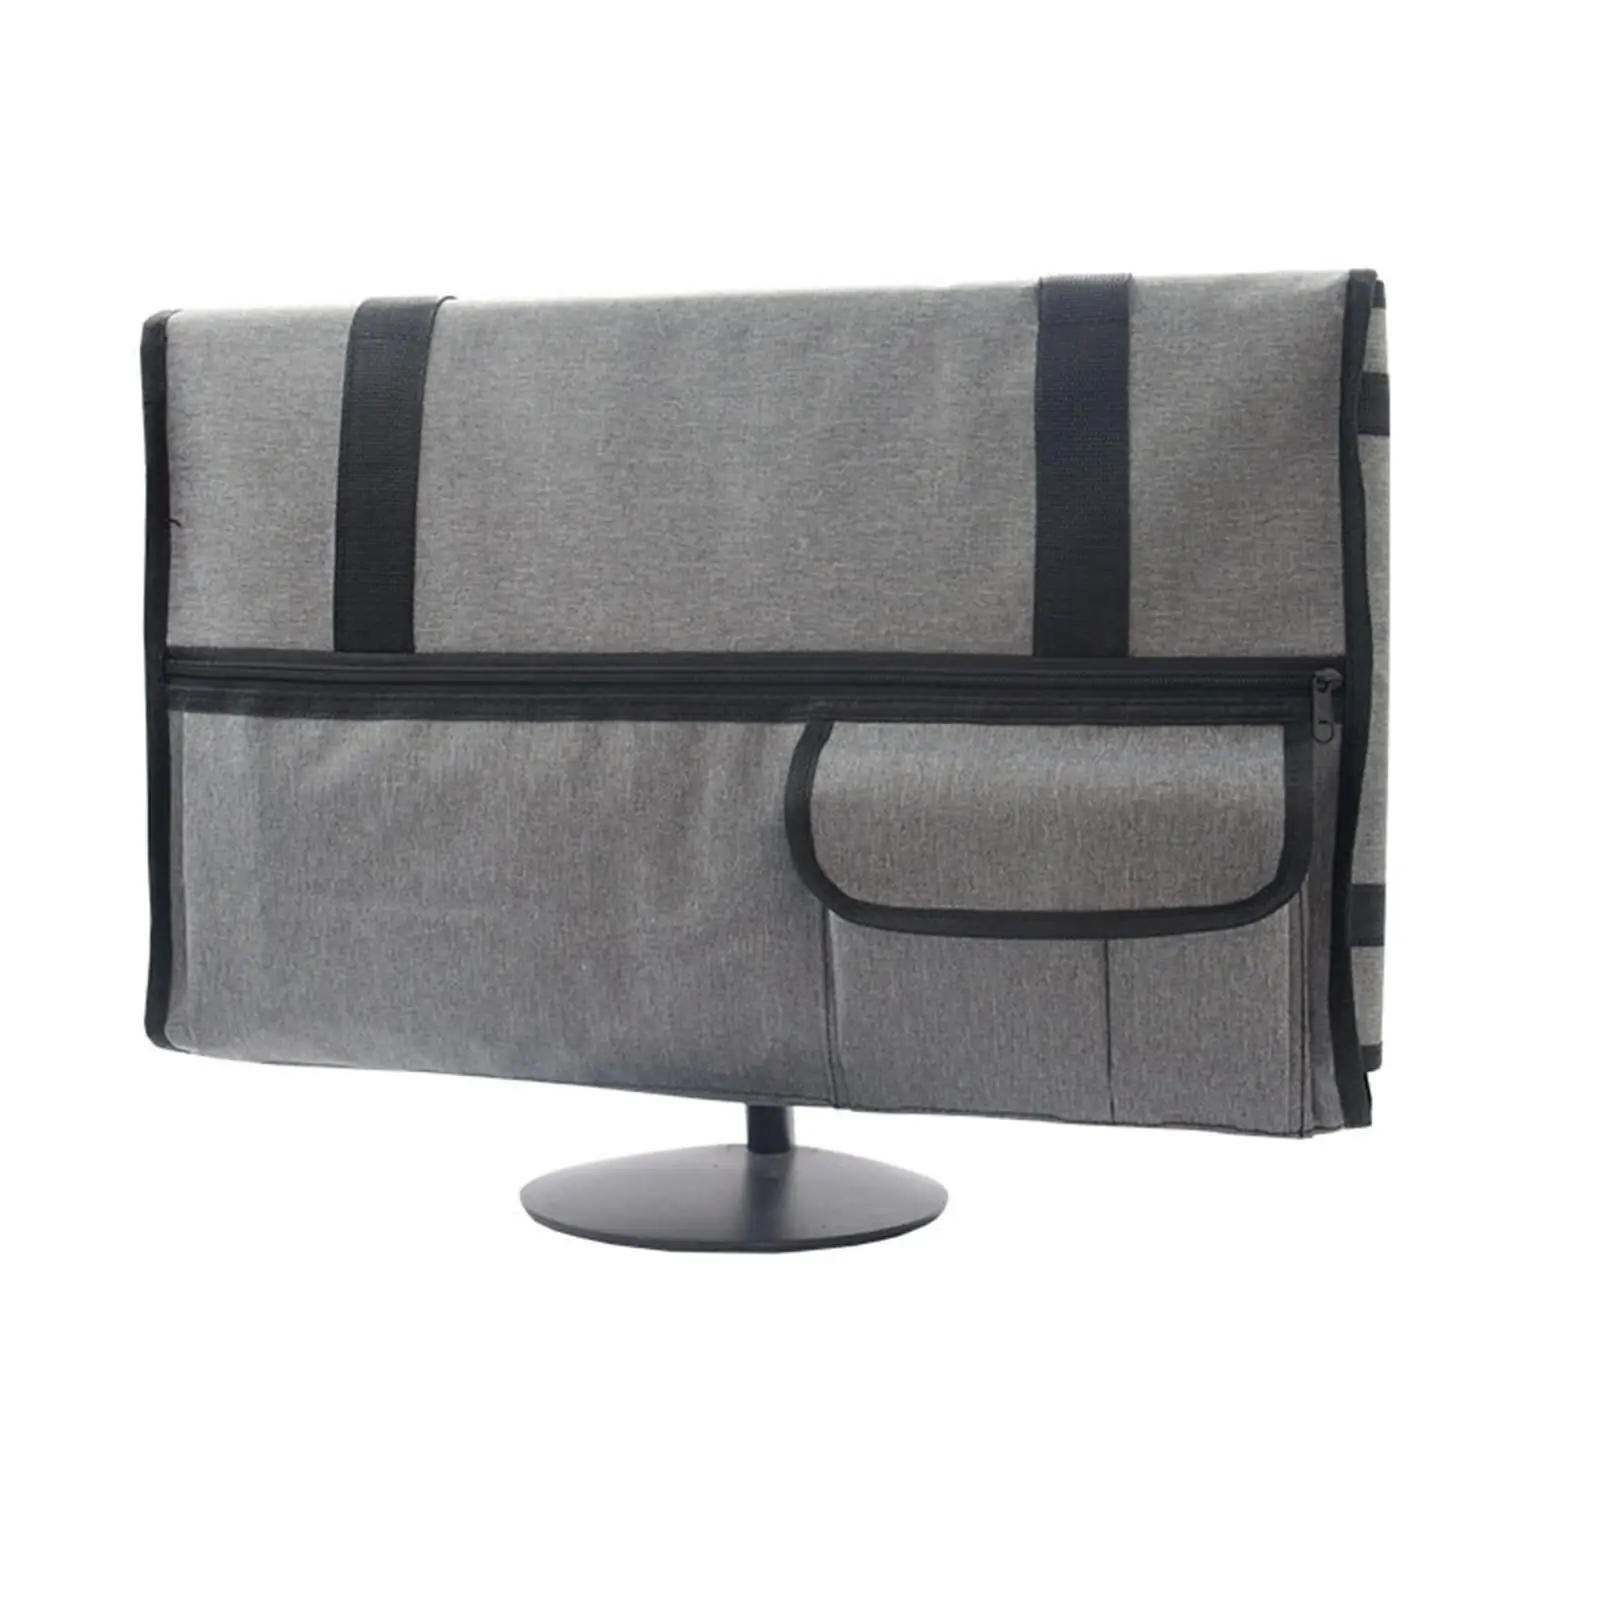 Monitor Carrying Case Padded Laptop Carrying Bag Computer Screen Case Protective Case for Travel